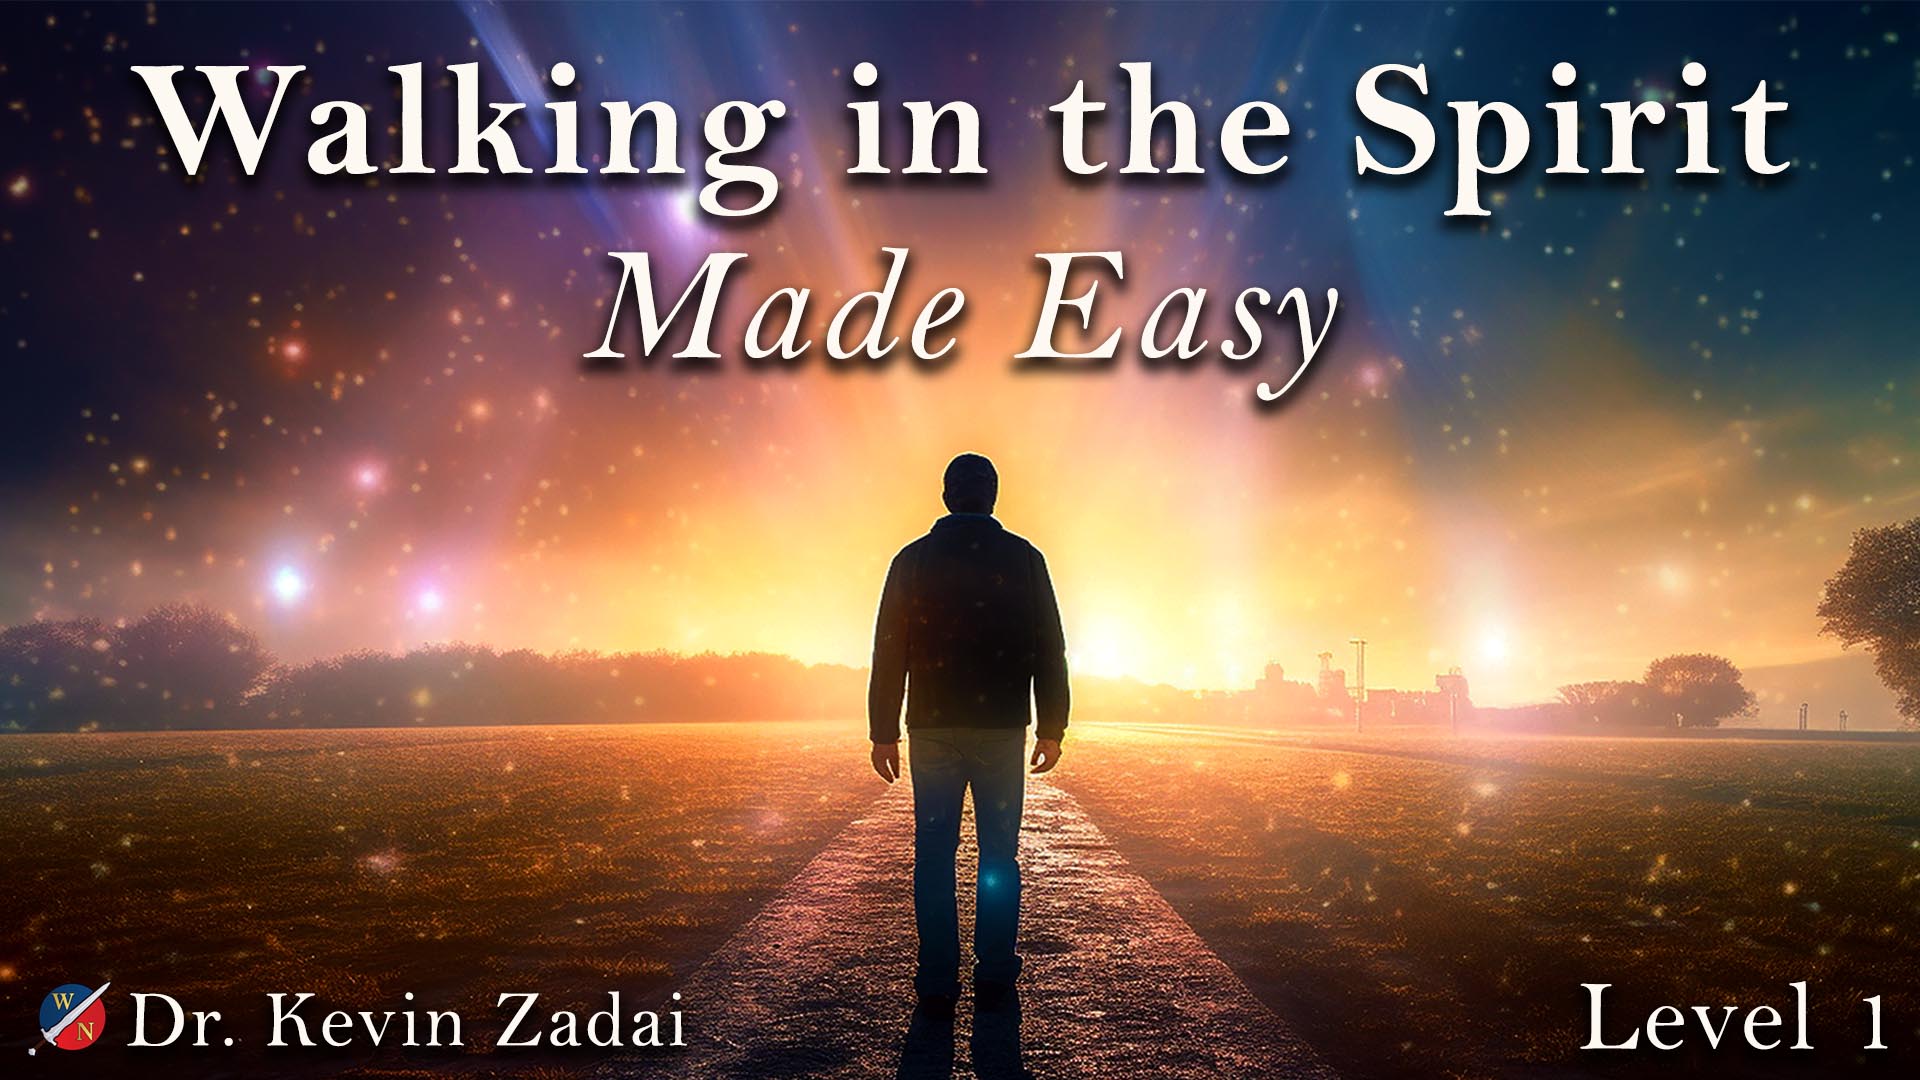 Walking in the Spirit Made Easy by Dr. Kevin Zadai